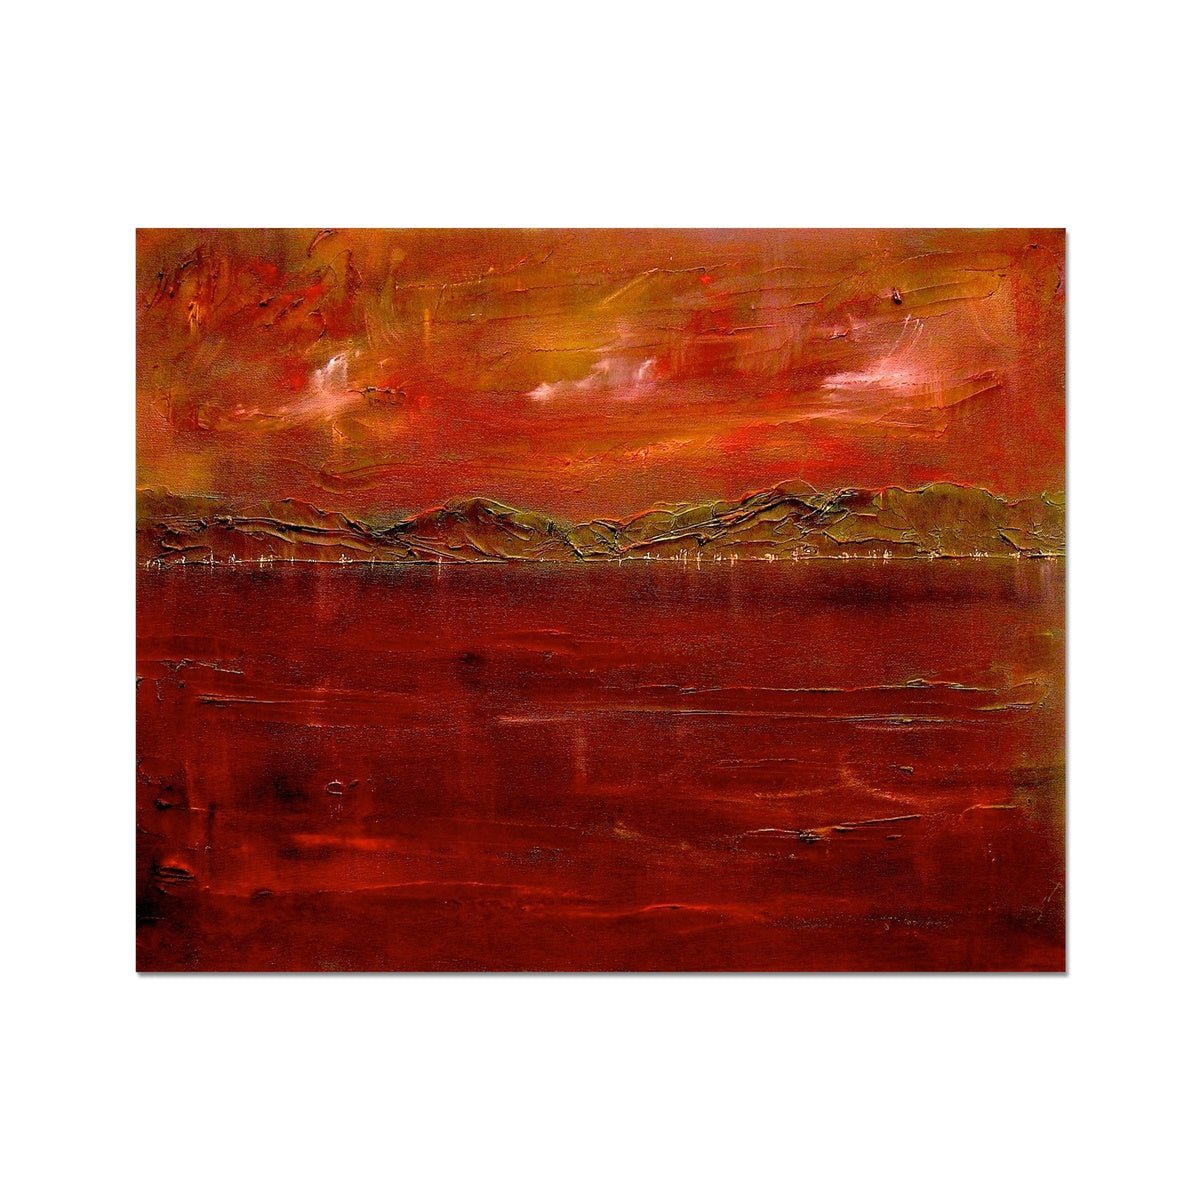 Deep Clyde Dusk Painting | Artist Proof Collector Prints From Scotland-Artist Proof Collector Prints-River Clyde Art Gallery-20"x16"-Paintings, Prints, Homeware, Art Gifts From Scotland By Scottish Artist Kevin Hunter